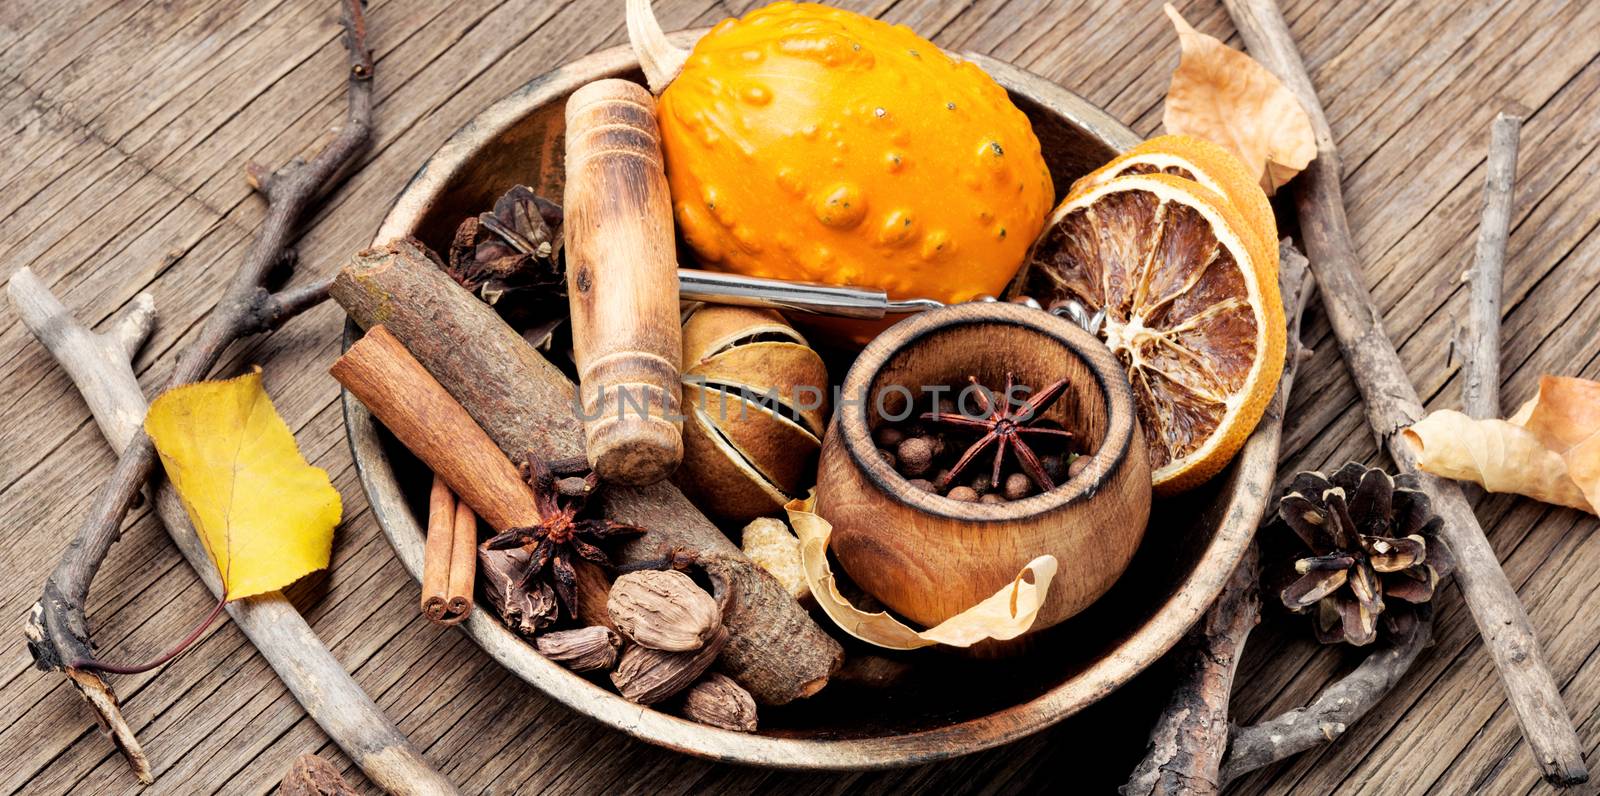 Ingredients for mulled wine by LMykola